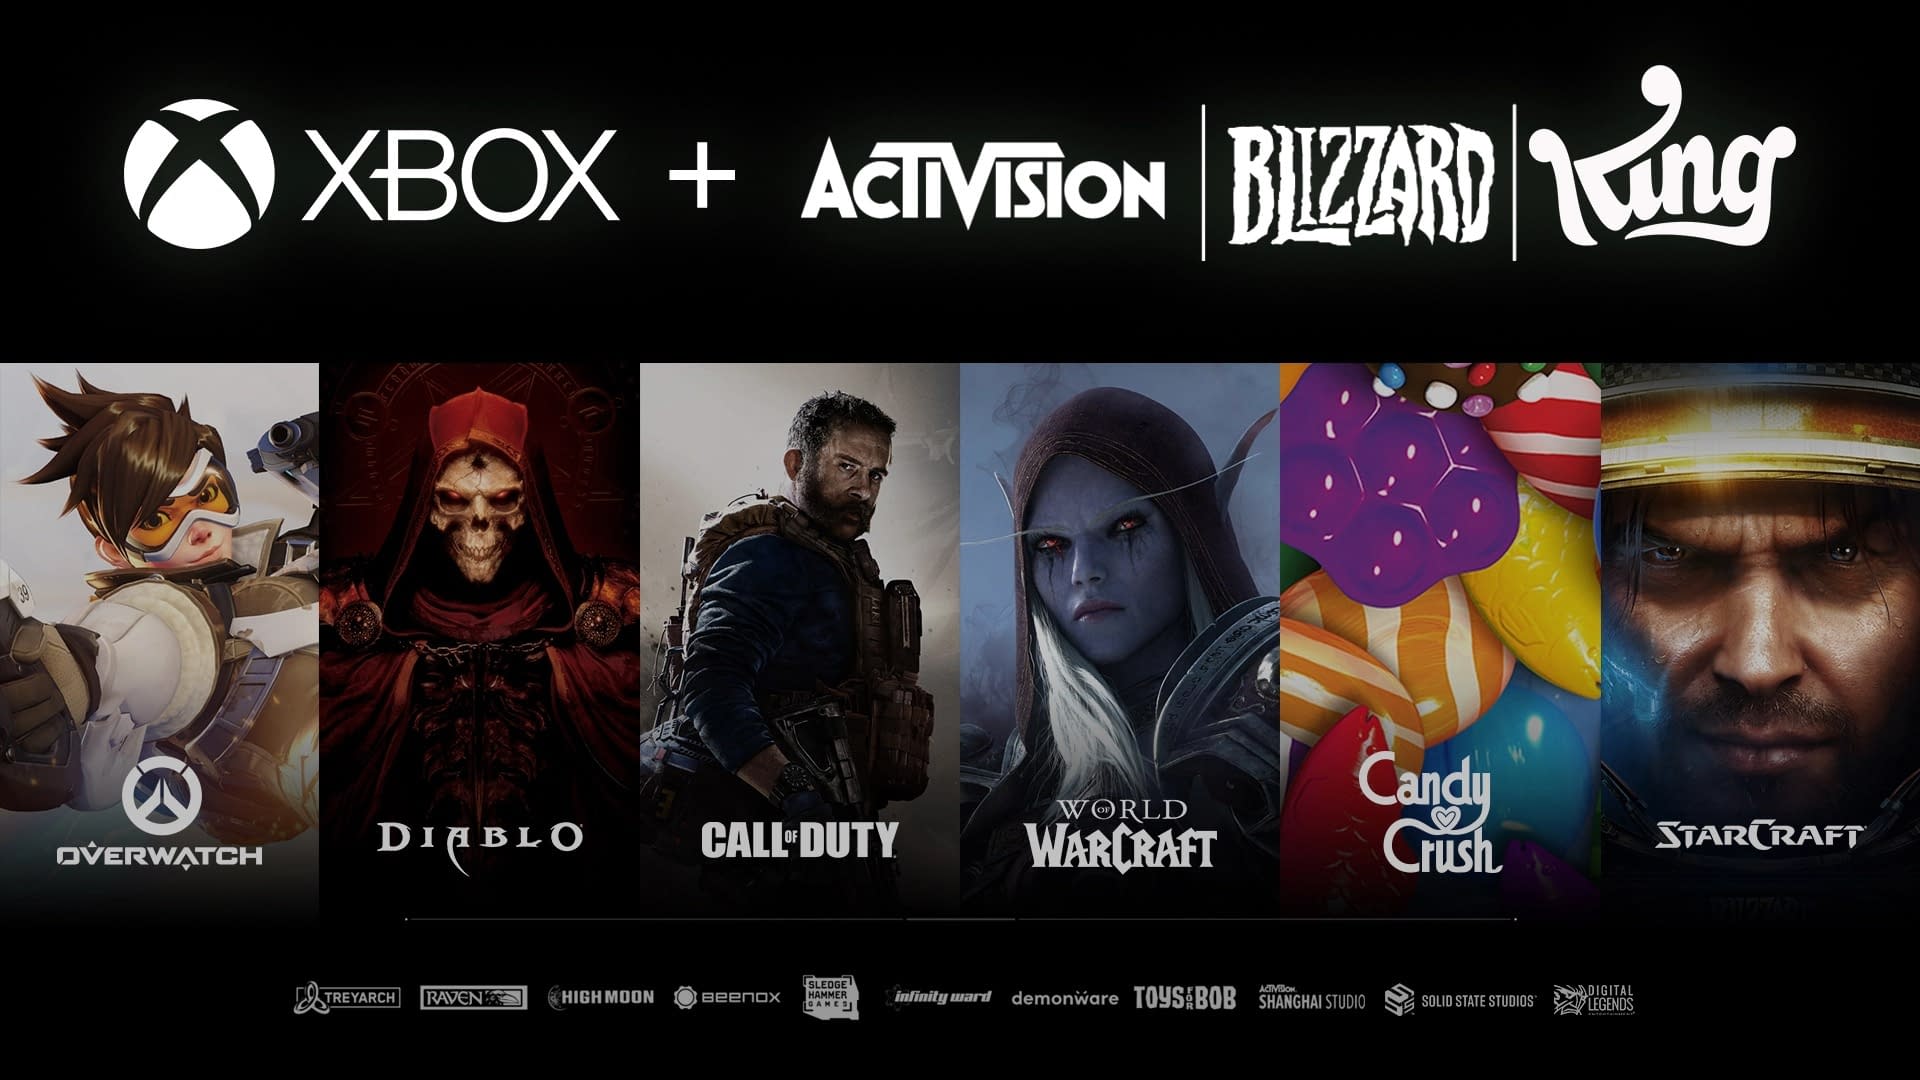 Microsoft Activision Blizzard agreement came more than a confirmation